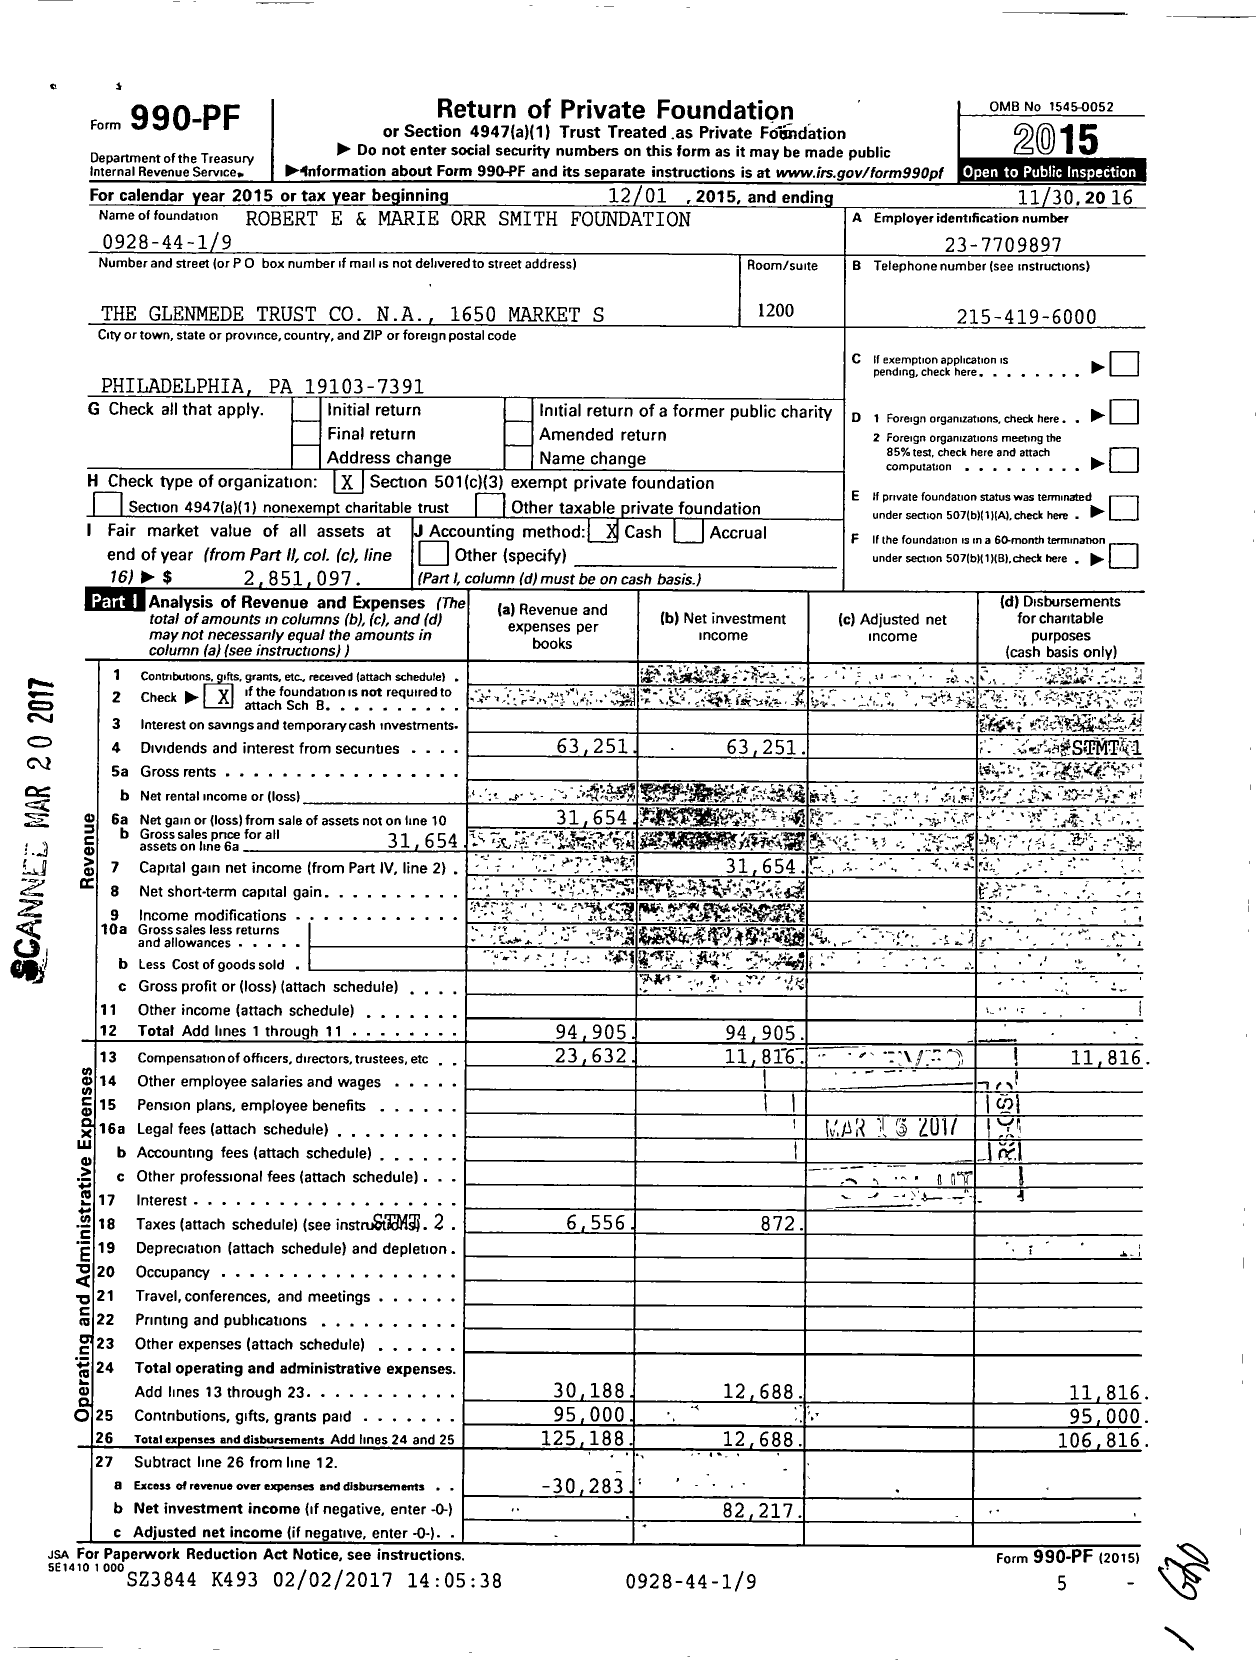 Image of first page of 2015 Form 990PF for Robert E and Marie Orr Smith Foundation